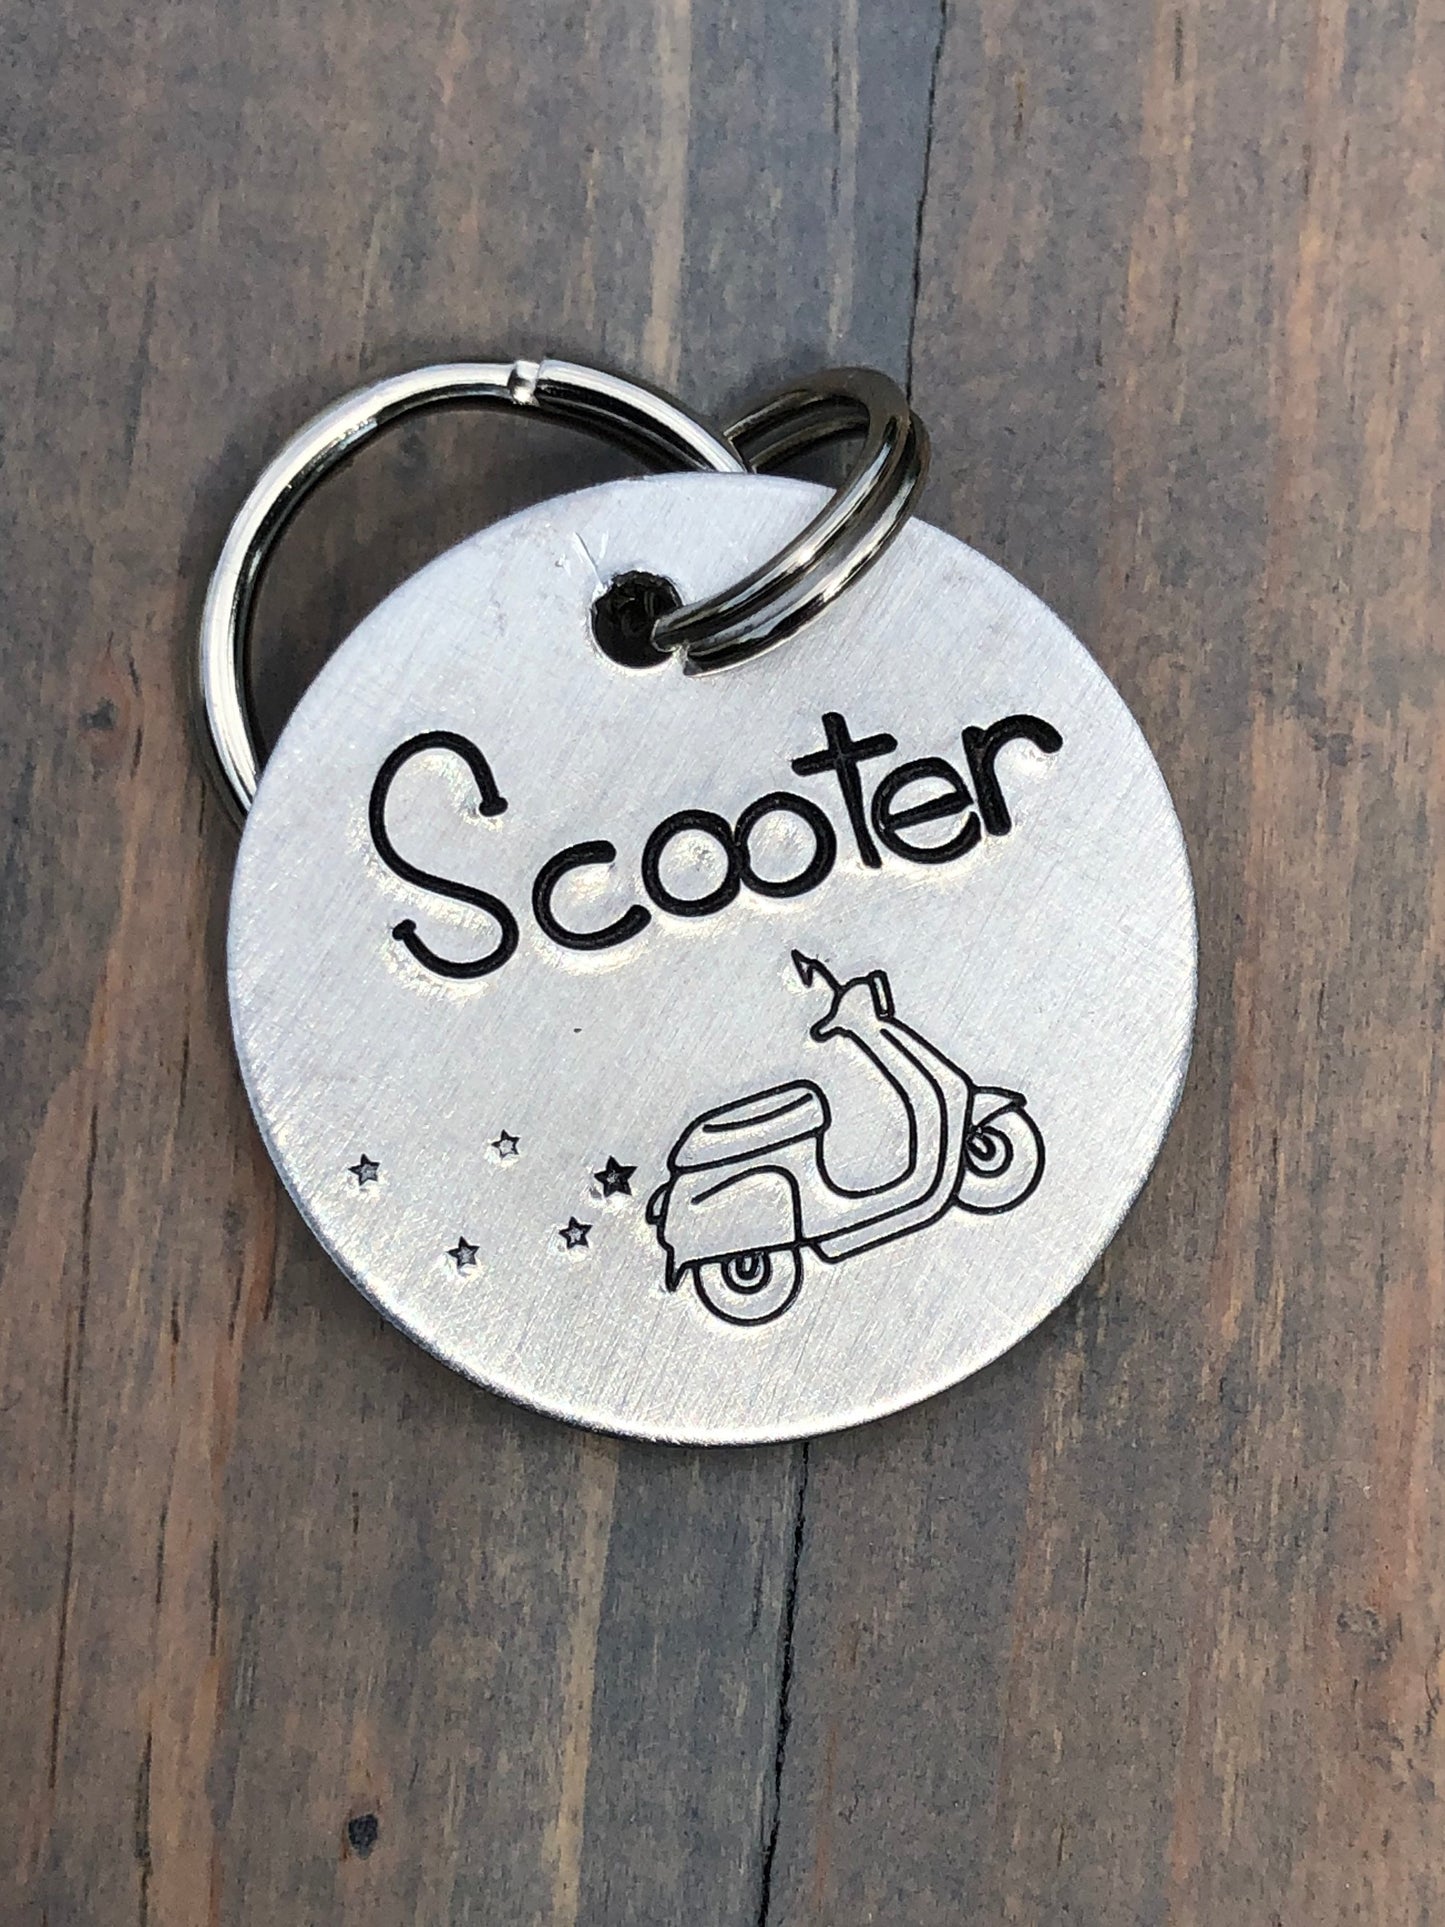 Name Tag for Dog, Hand Stamped Pet ID Tag, Scooter, Vespa, Dog Tag with Scooter